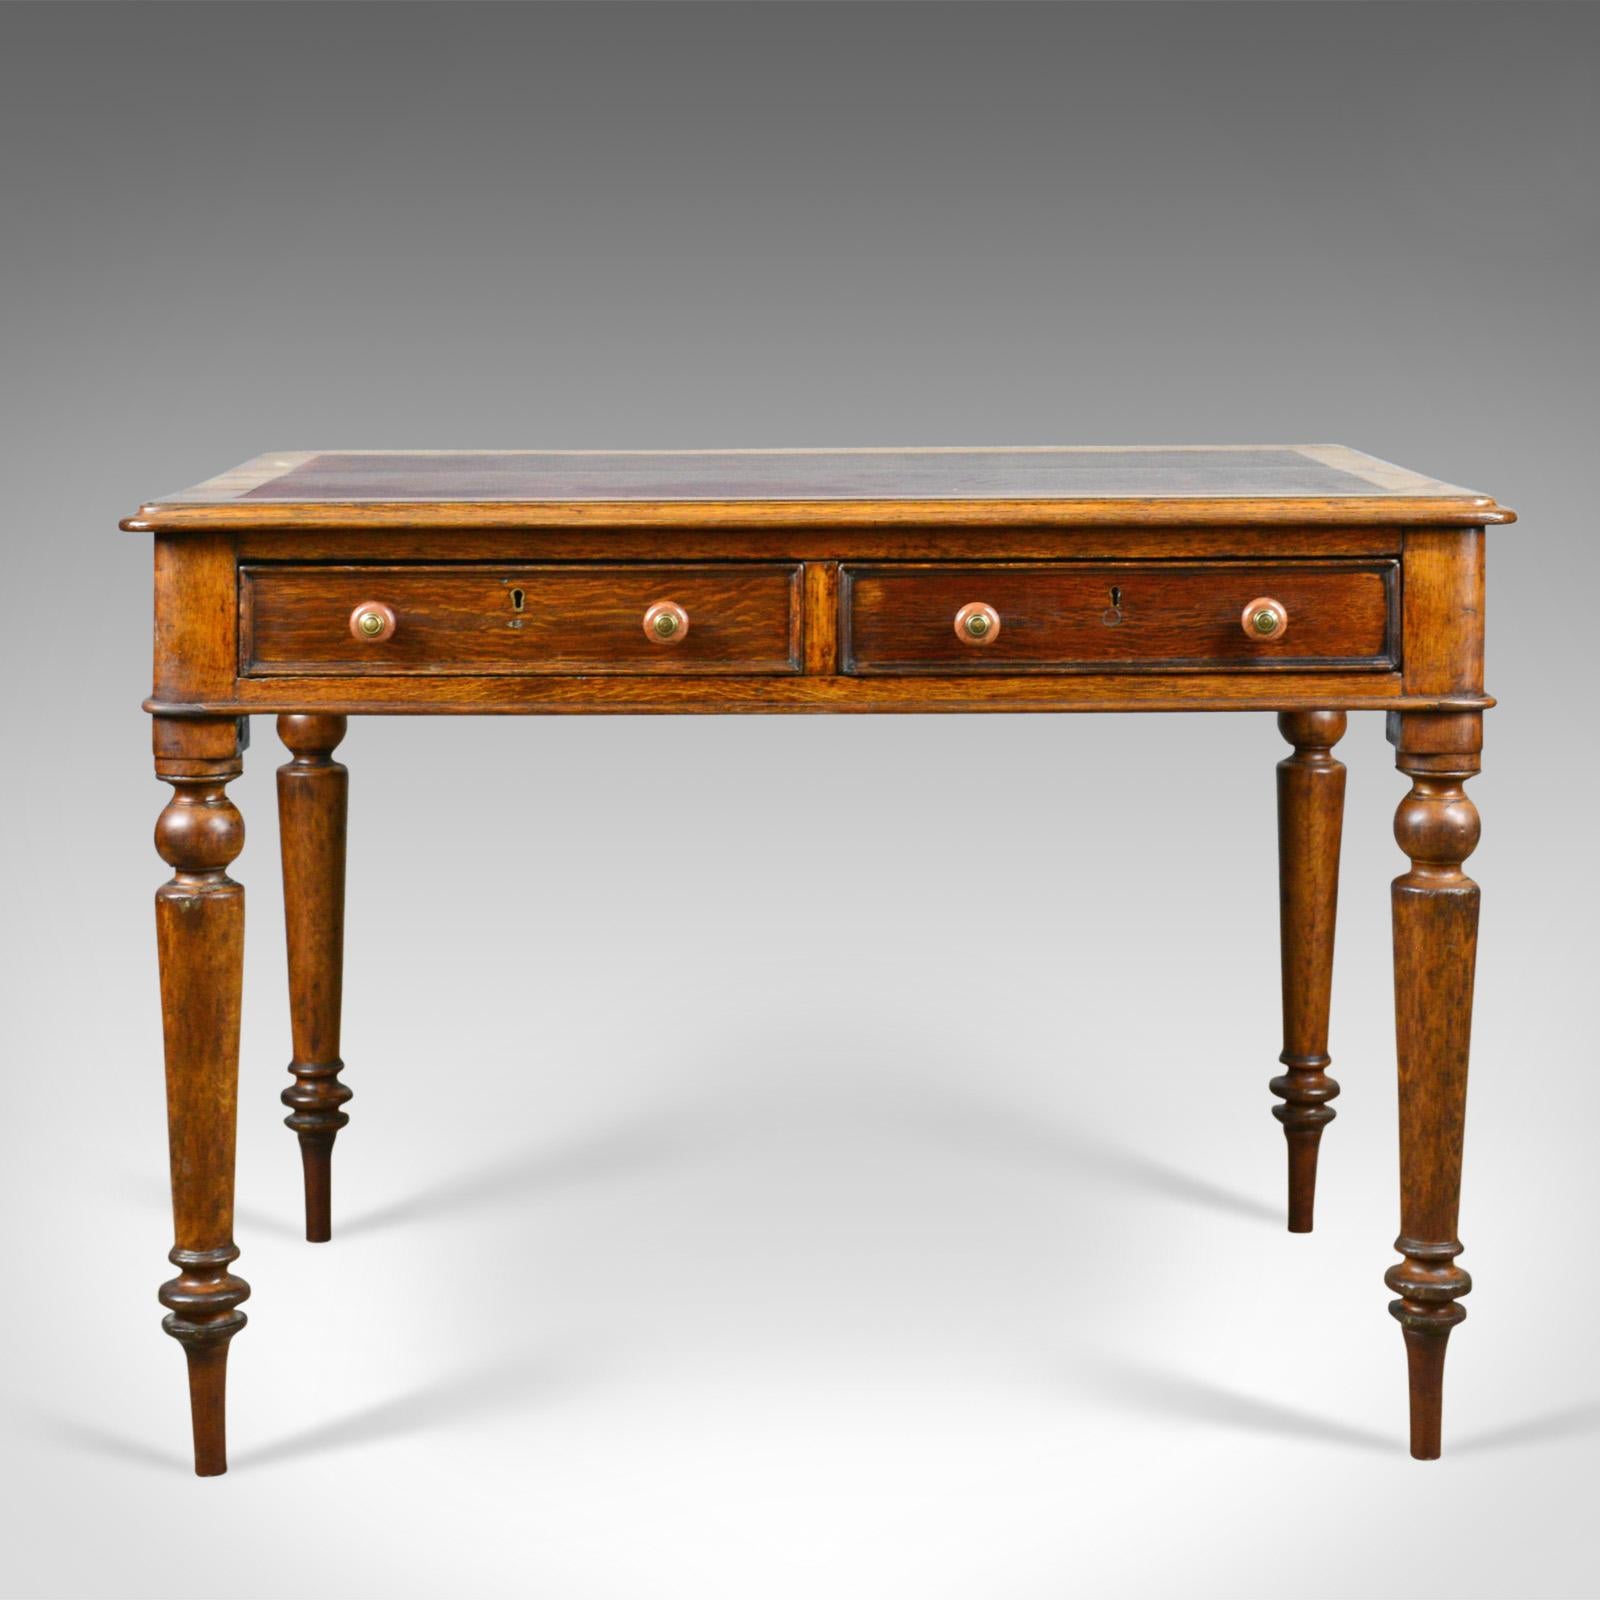 This is an antique writing table, a Victorian library desk. English, oak from the mid 19th century, circa 1870.

Solid and stable in strong English oak with a desirable aged patina
Honey hues with attractive grain detail in a waxed polished